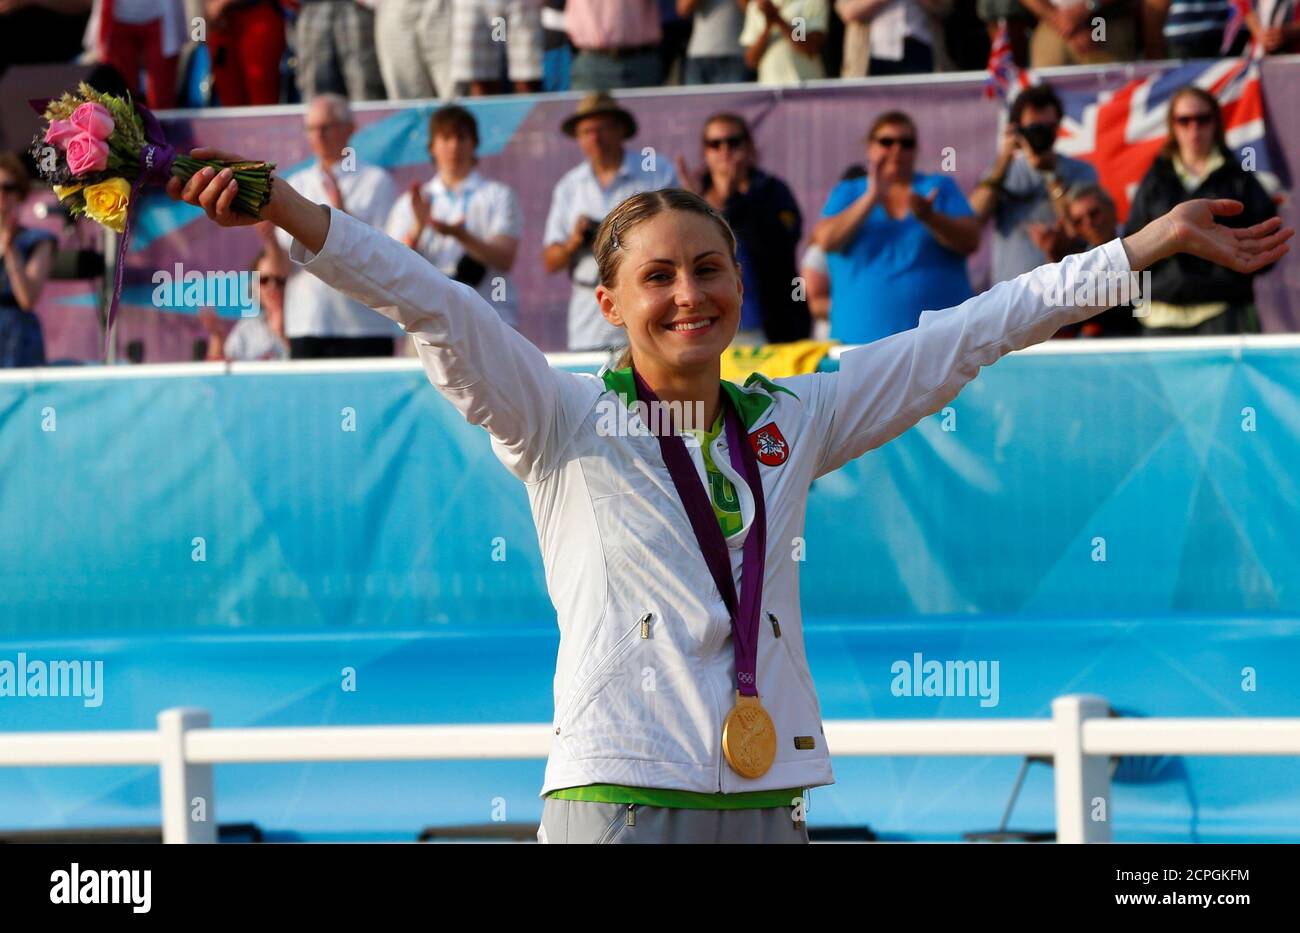 Lithuania's Laura Asadauskaite celebrates as she receives her gold medal during the victory ceremony for the women's modern pentathlon during the London 2012 Olympic Games August 12, 2012.     REUTERS/Mike Hutchings/File Photo Stock Photo